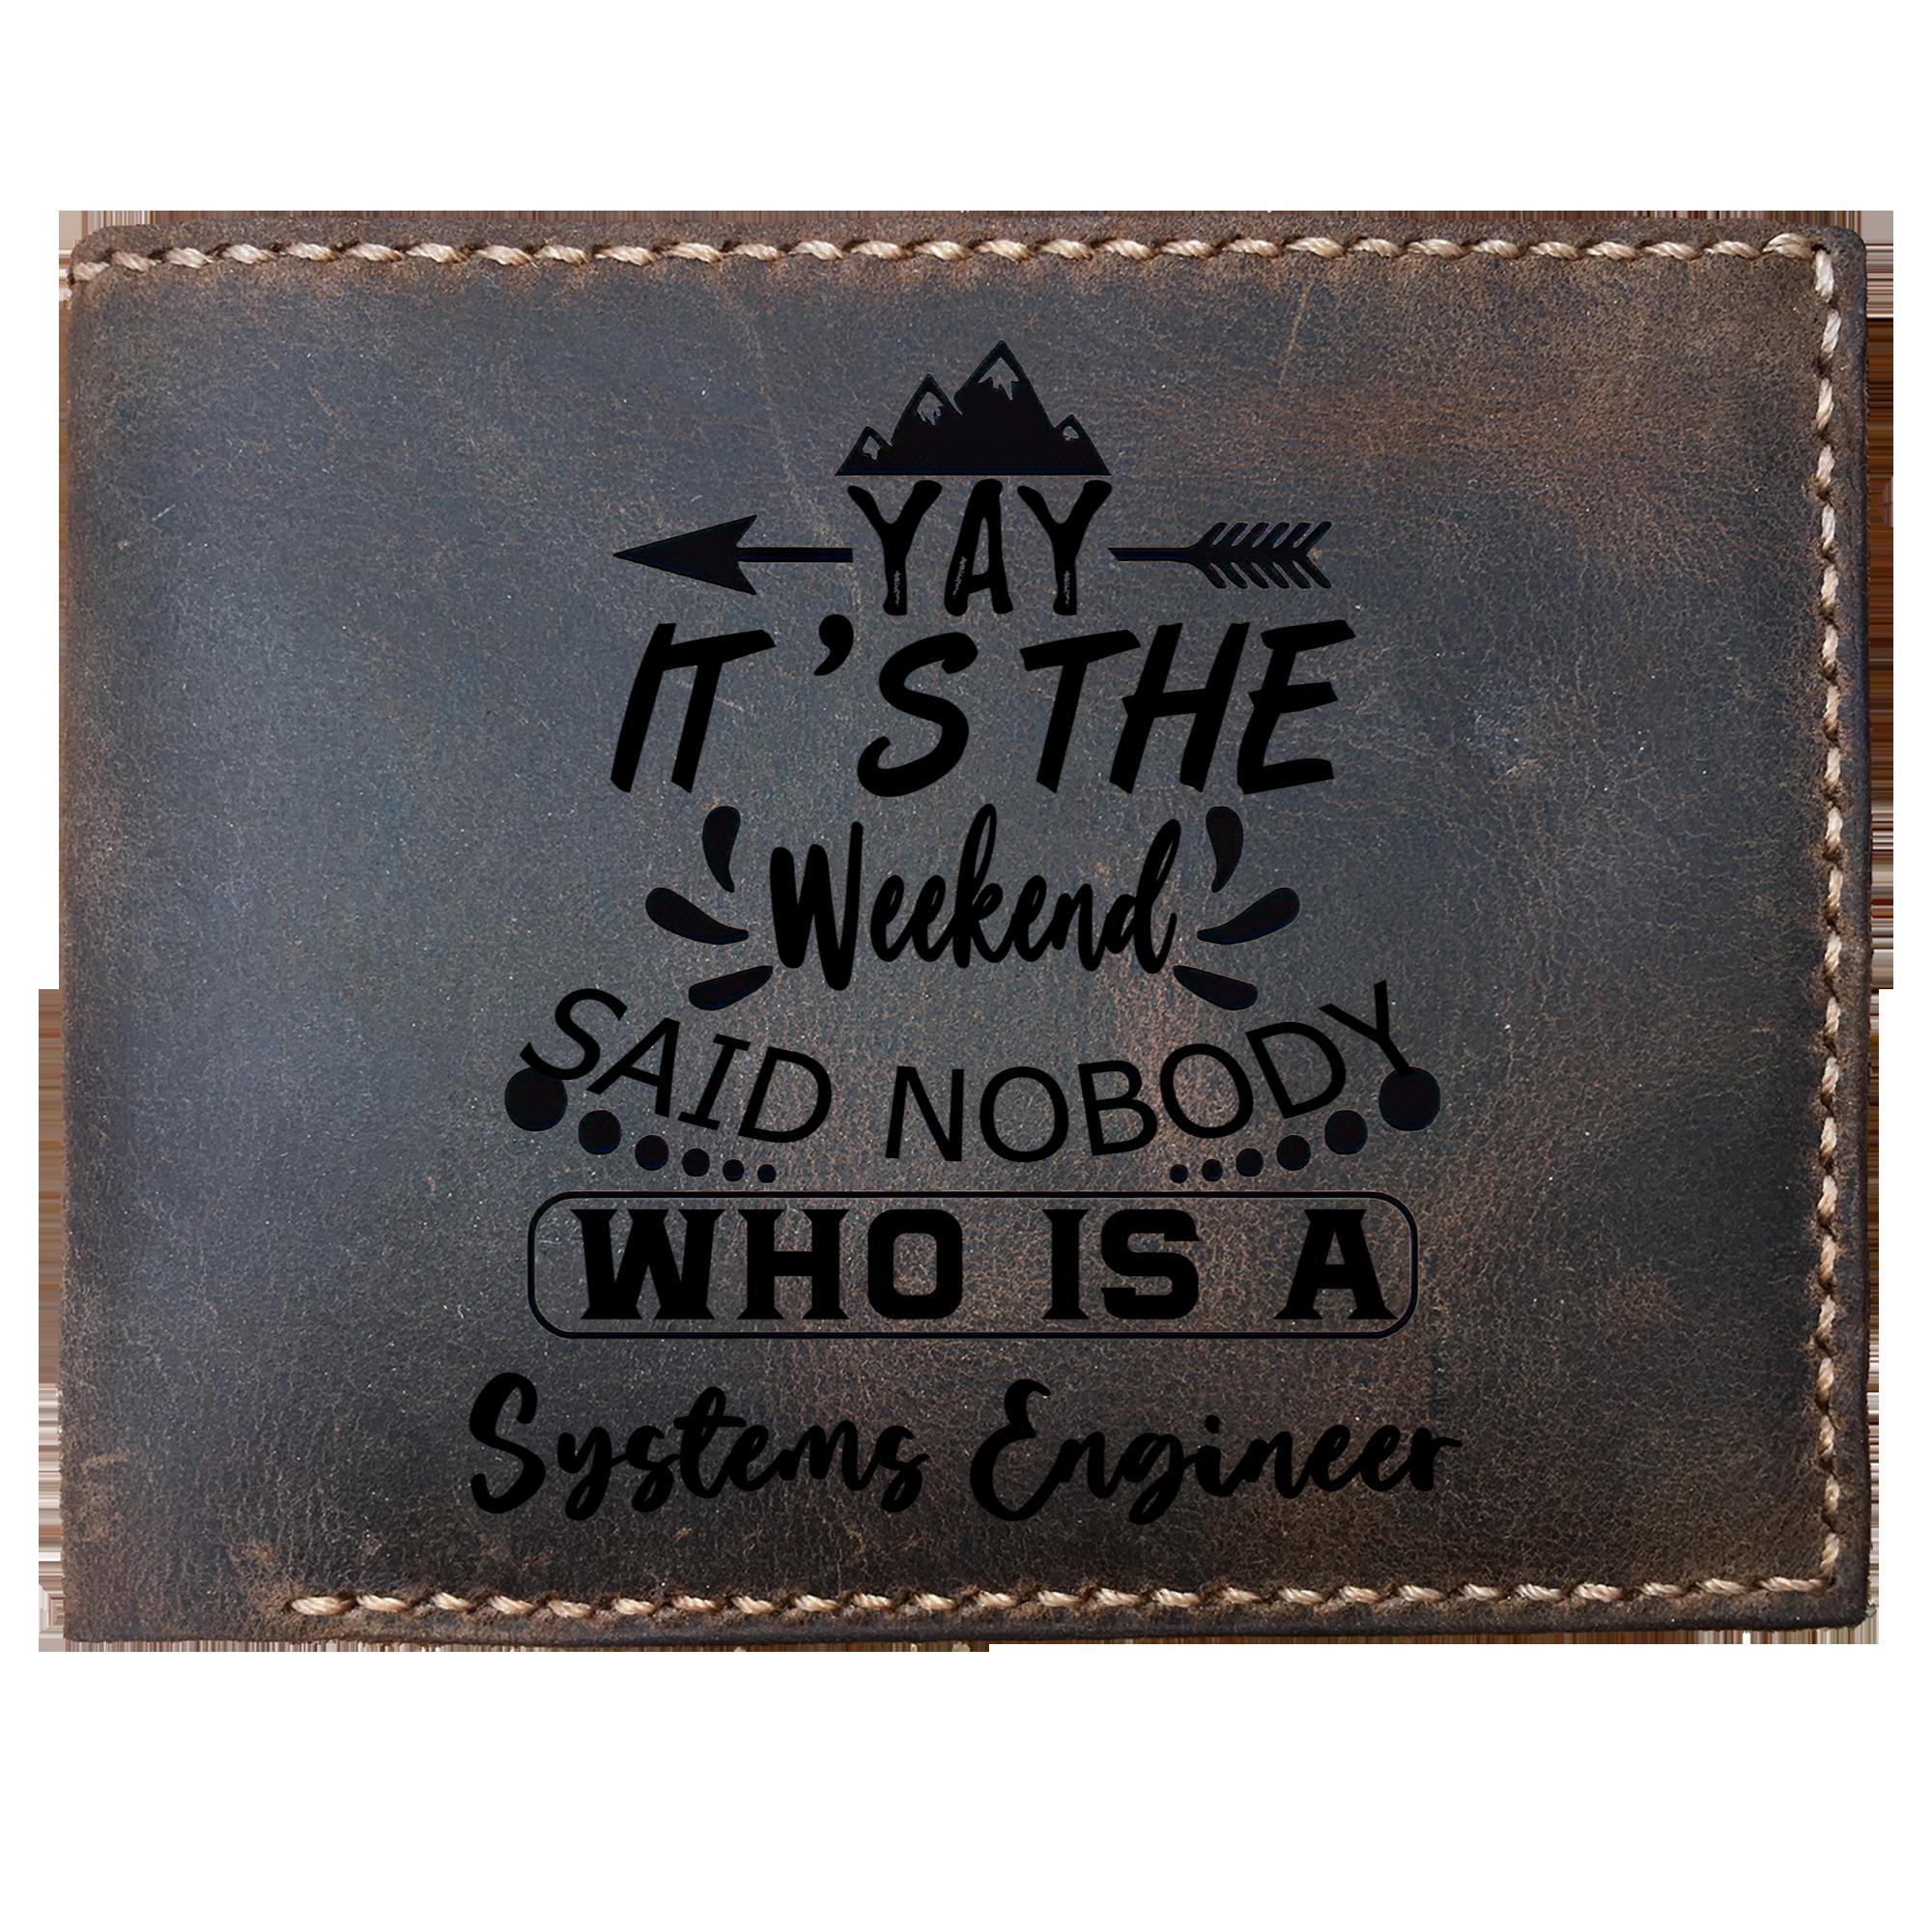 Skitongifts Funny Custom Laser Engraved Bifold Leather Wallet For Men, It's The Weekend Said Nobody Who Is A Systems Engineer, Father's Day Gifts